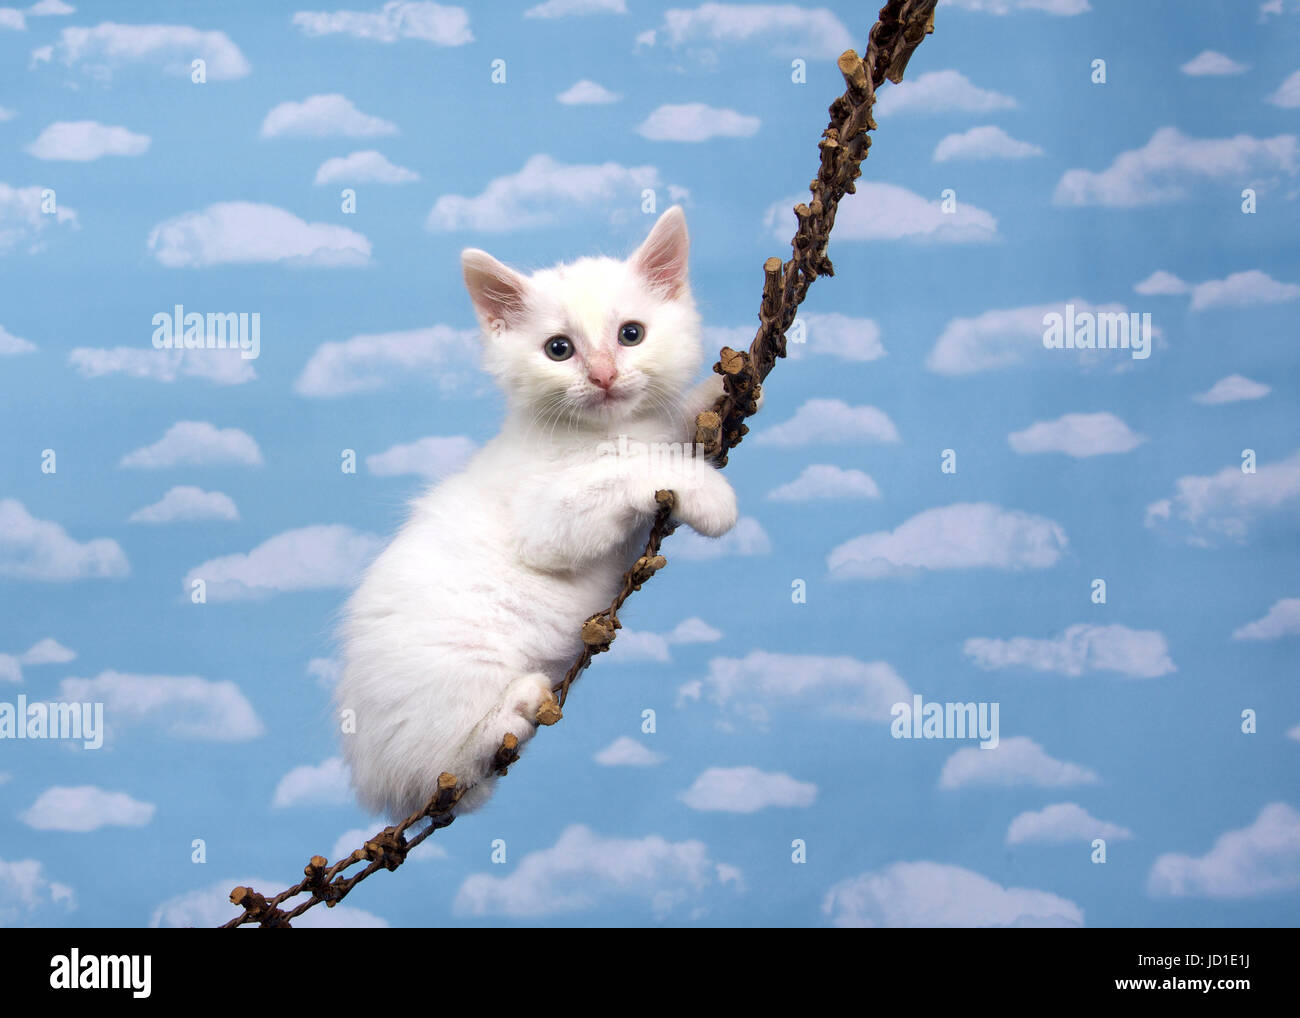 One small white kitten on a wood hanging ladder looking directly at viewer, sky background with many white fluffy clouds. Stock Photo